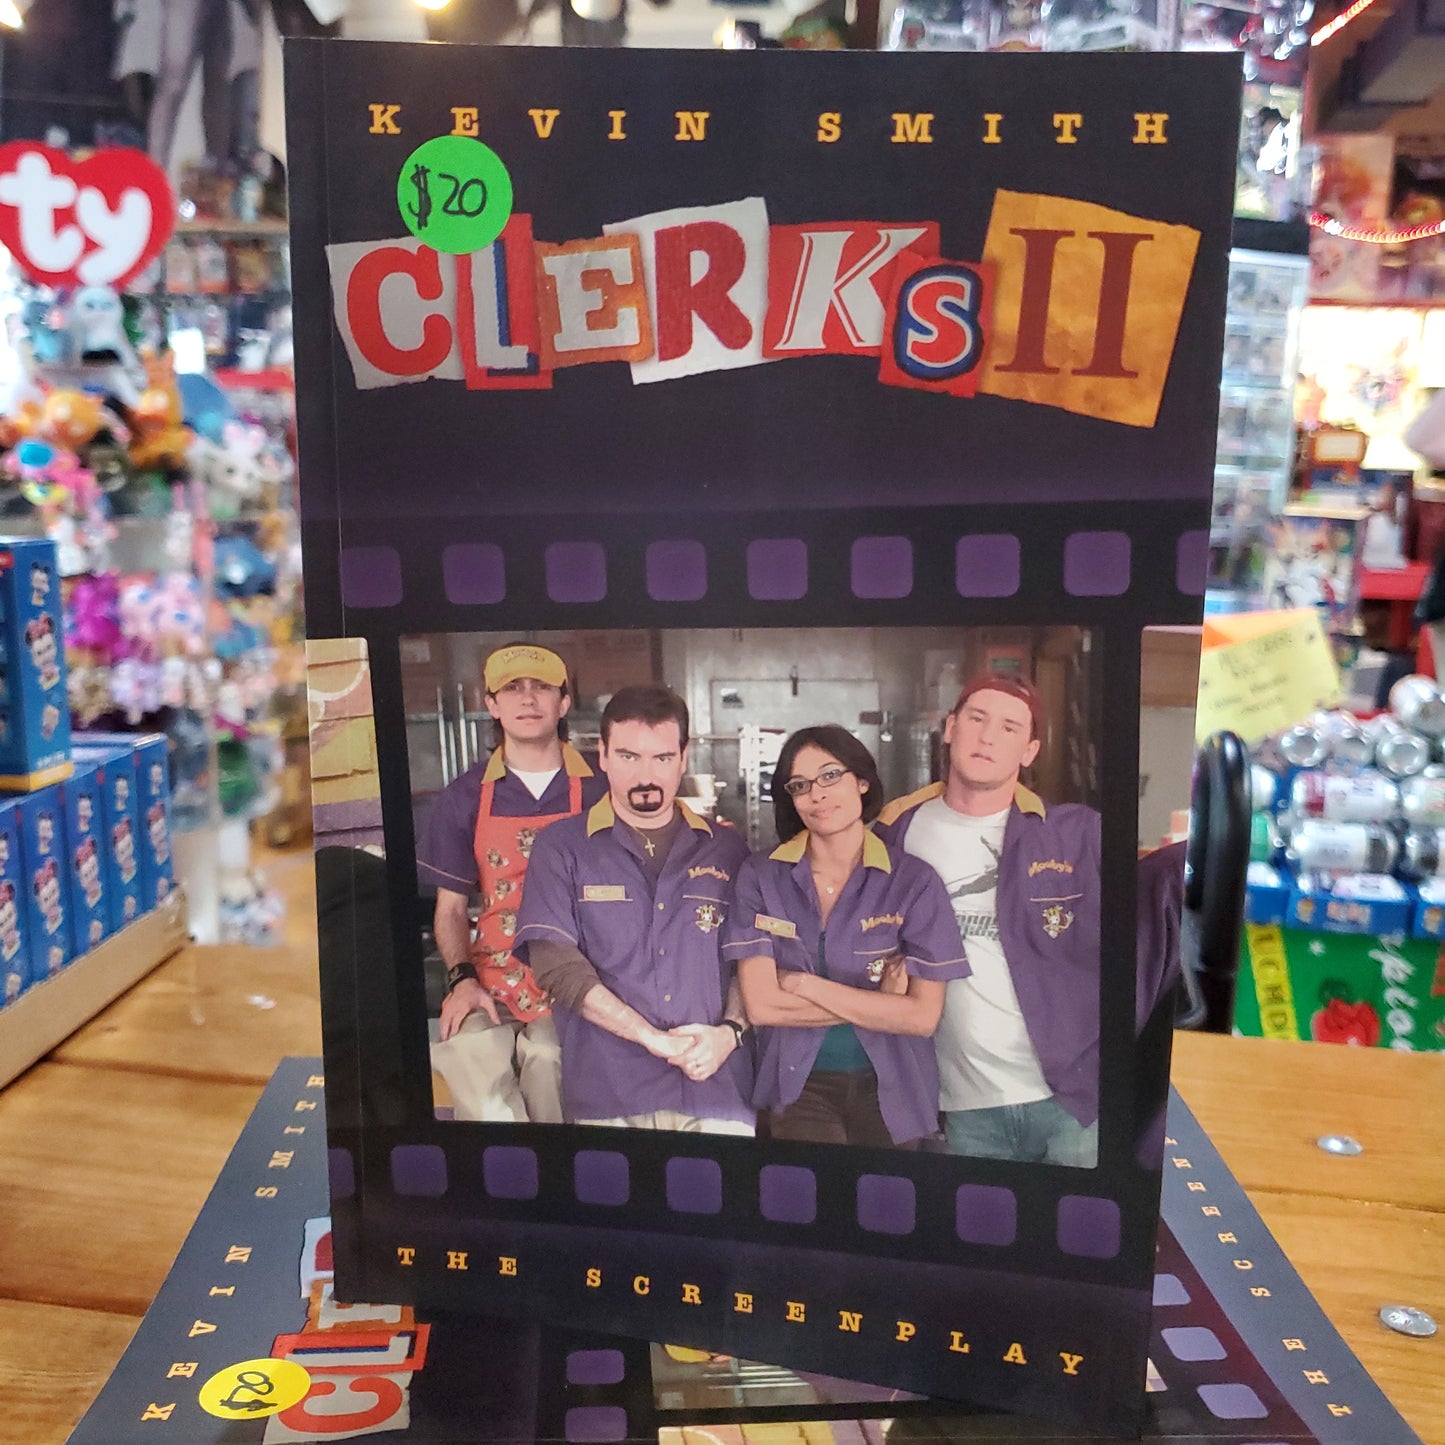 Clerks II: The Screenplay by Kevin Smith